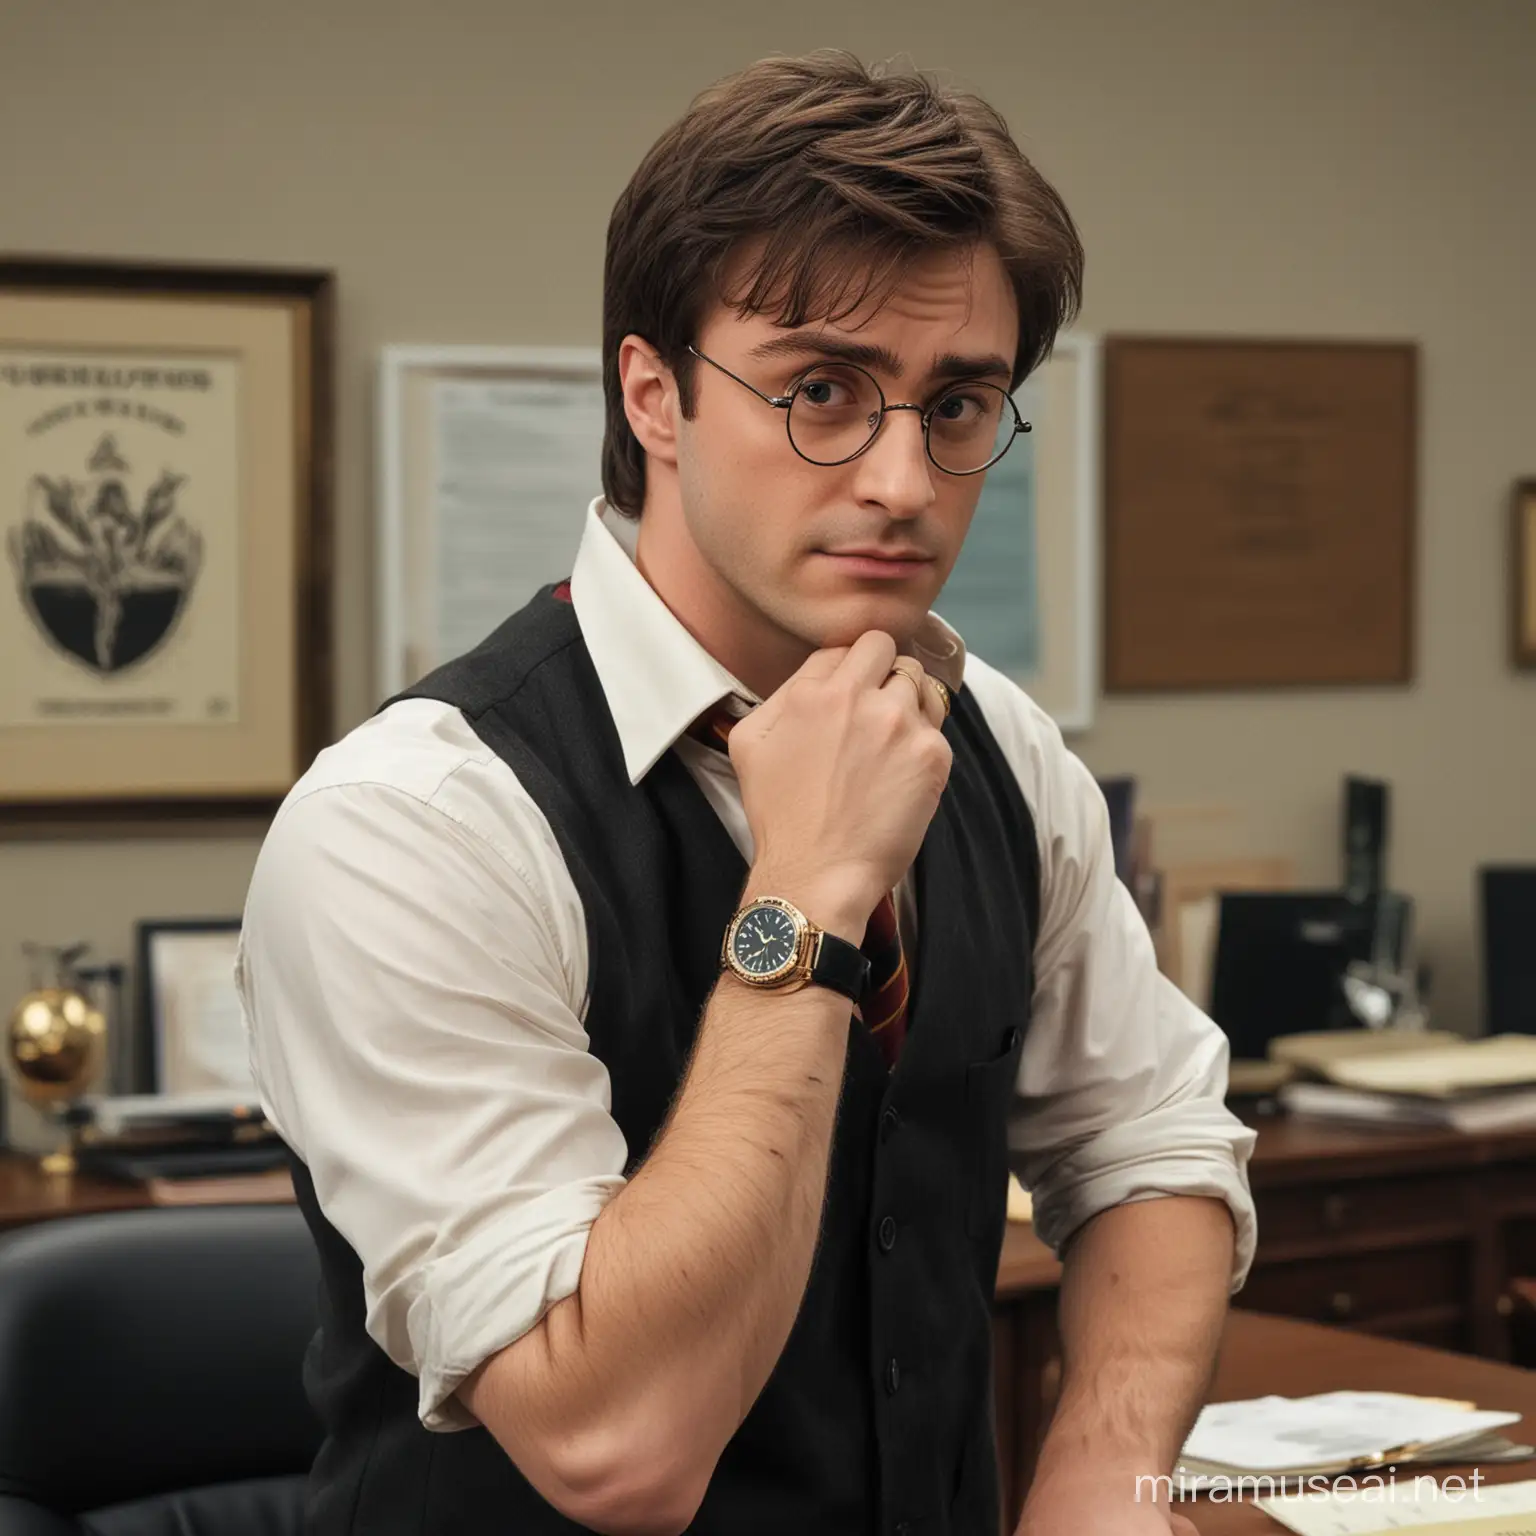 Harry Potter Contemplating with Rolex in Office Setting